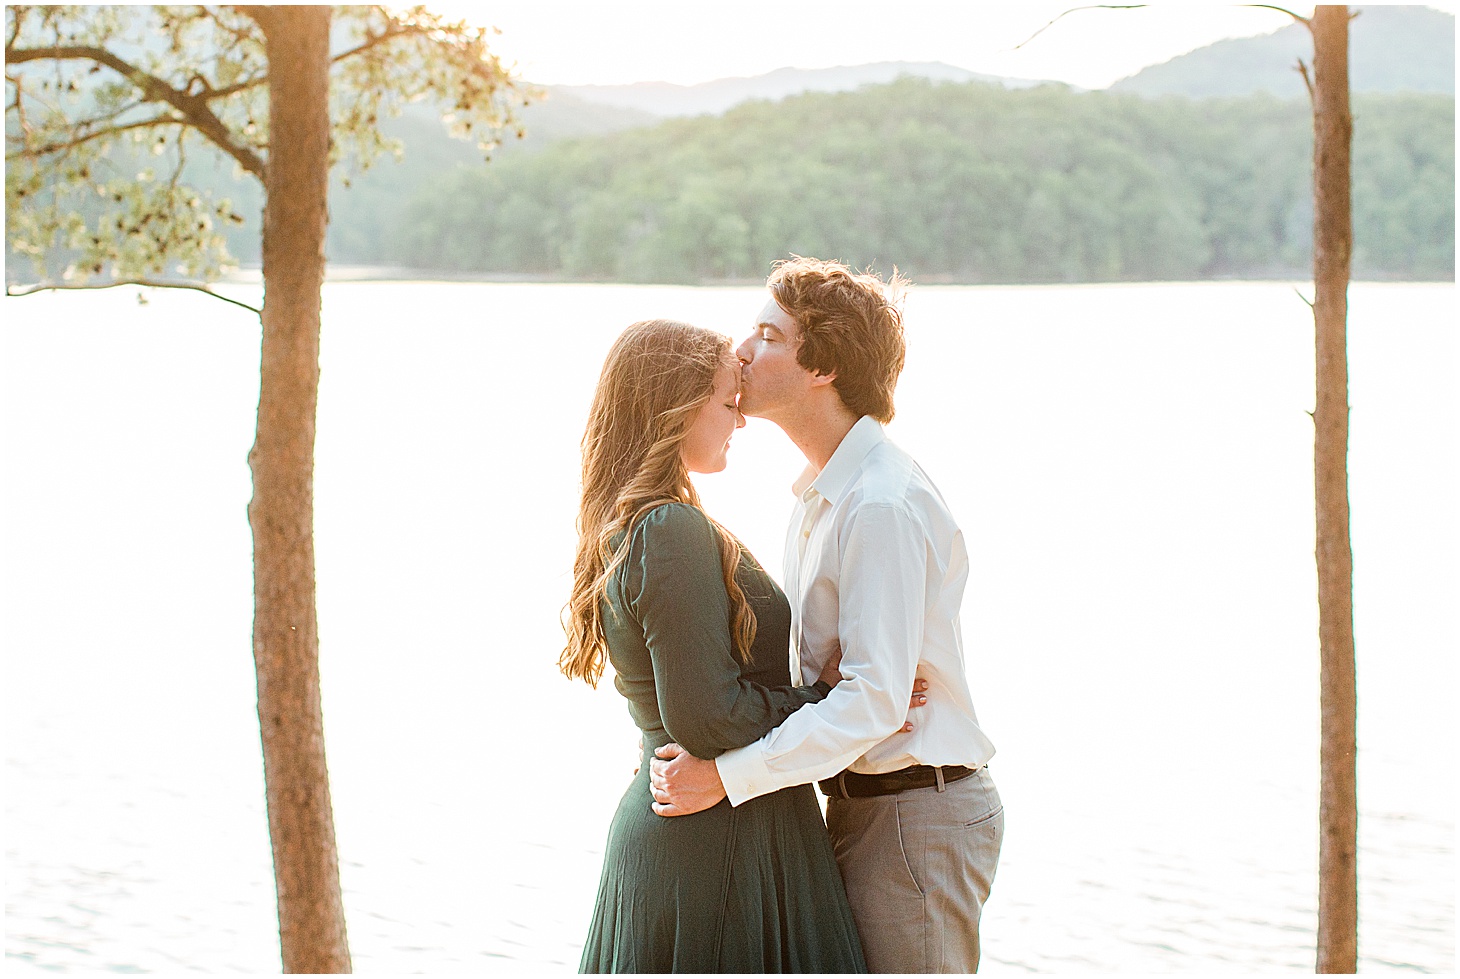 carvinscoveengagementsession_roanokeengagementsession_carvinscove_virginiawedding_virginiaweddingphotographer_vaweddingphotographer_photo_0058.jpg